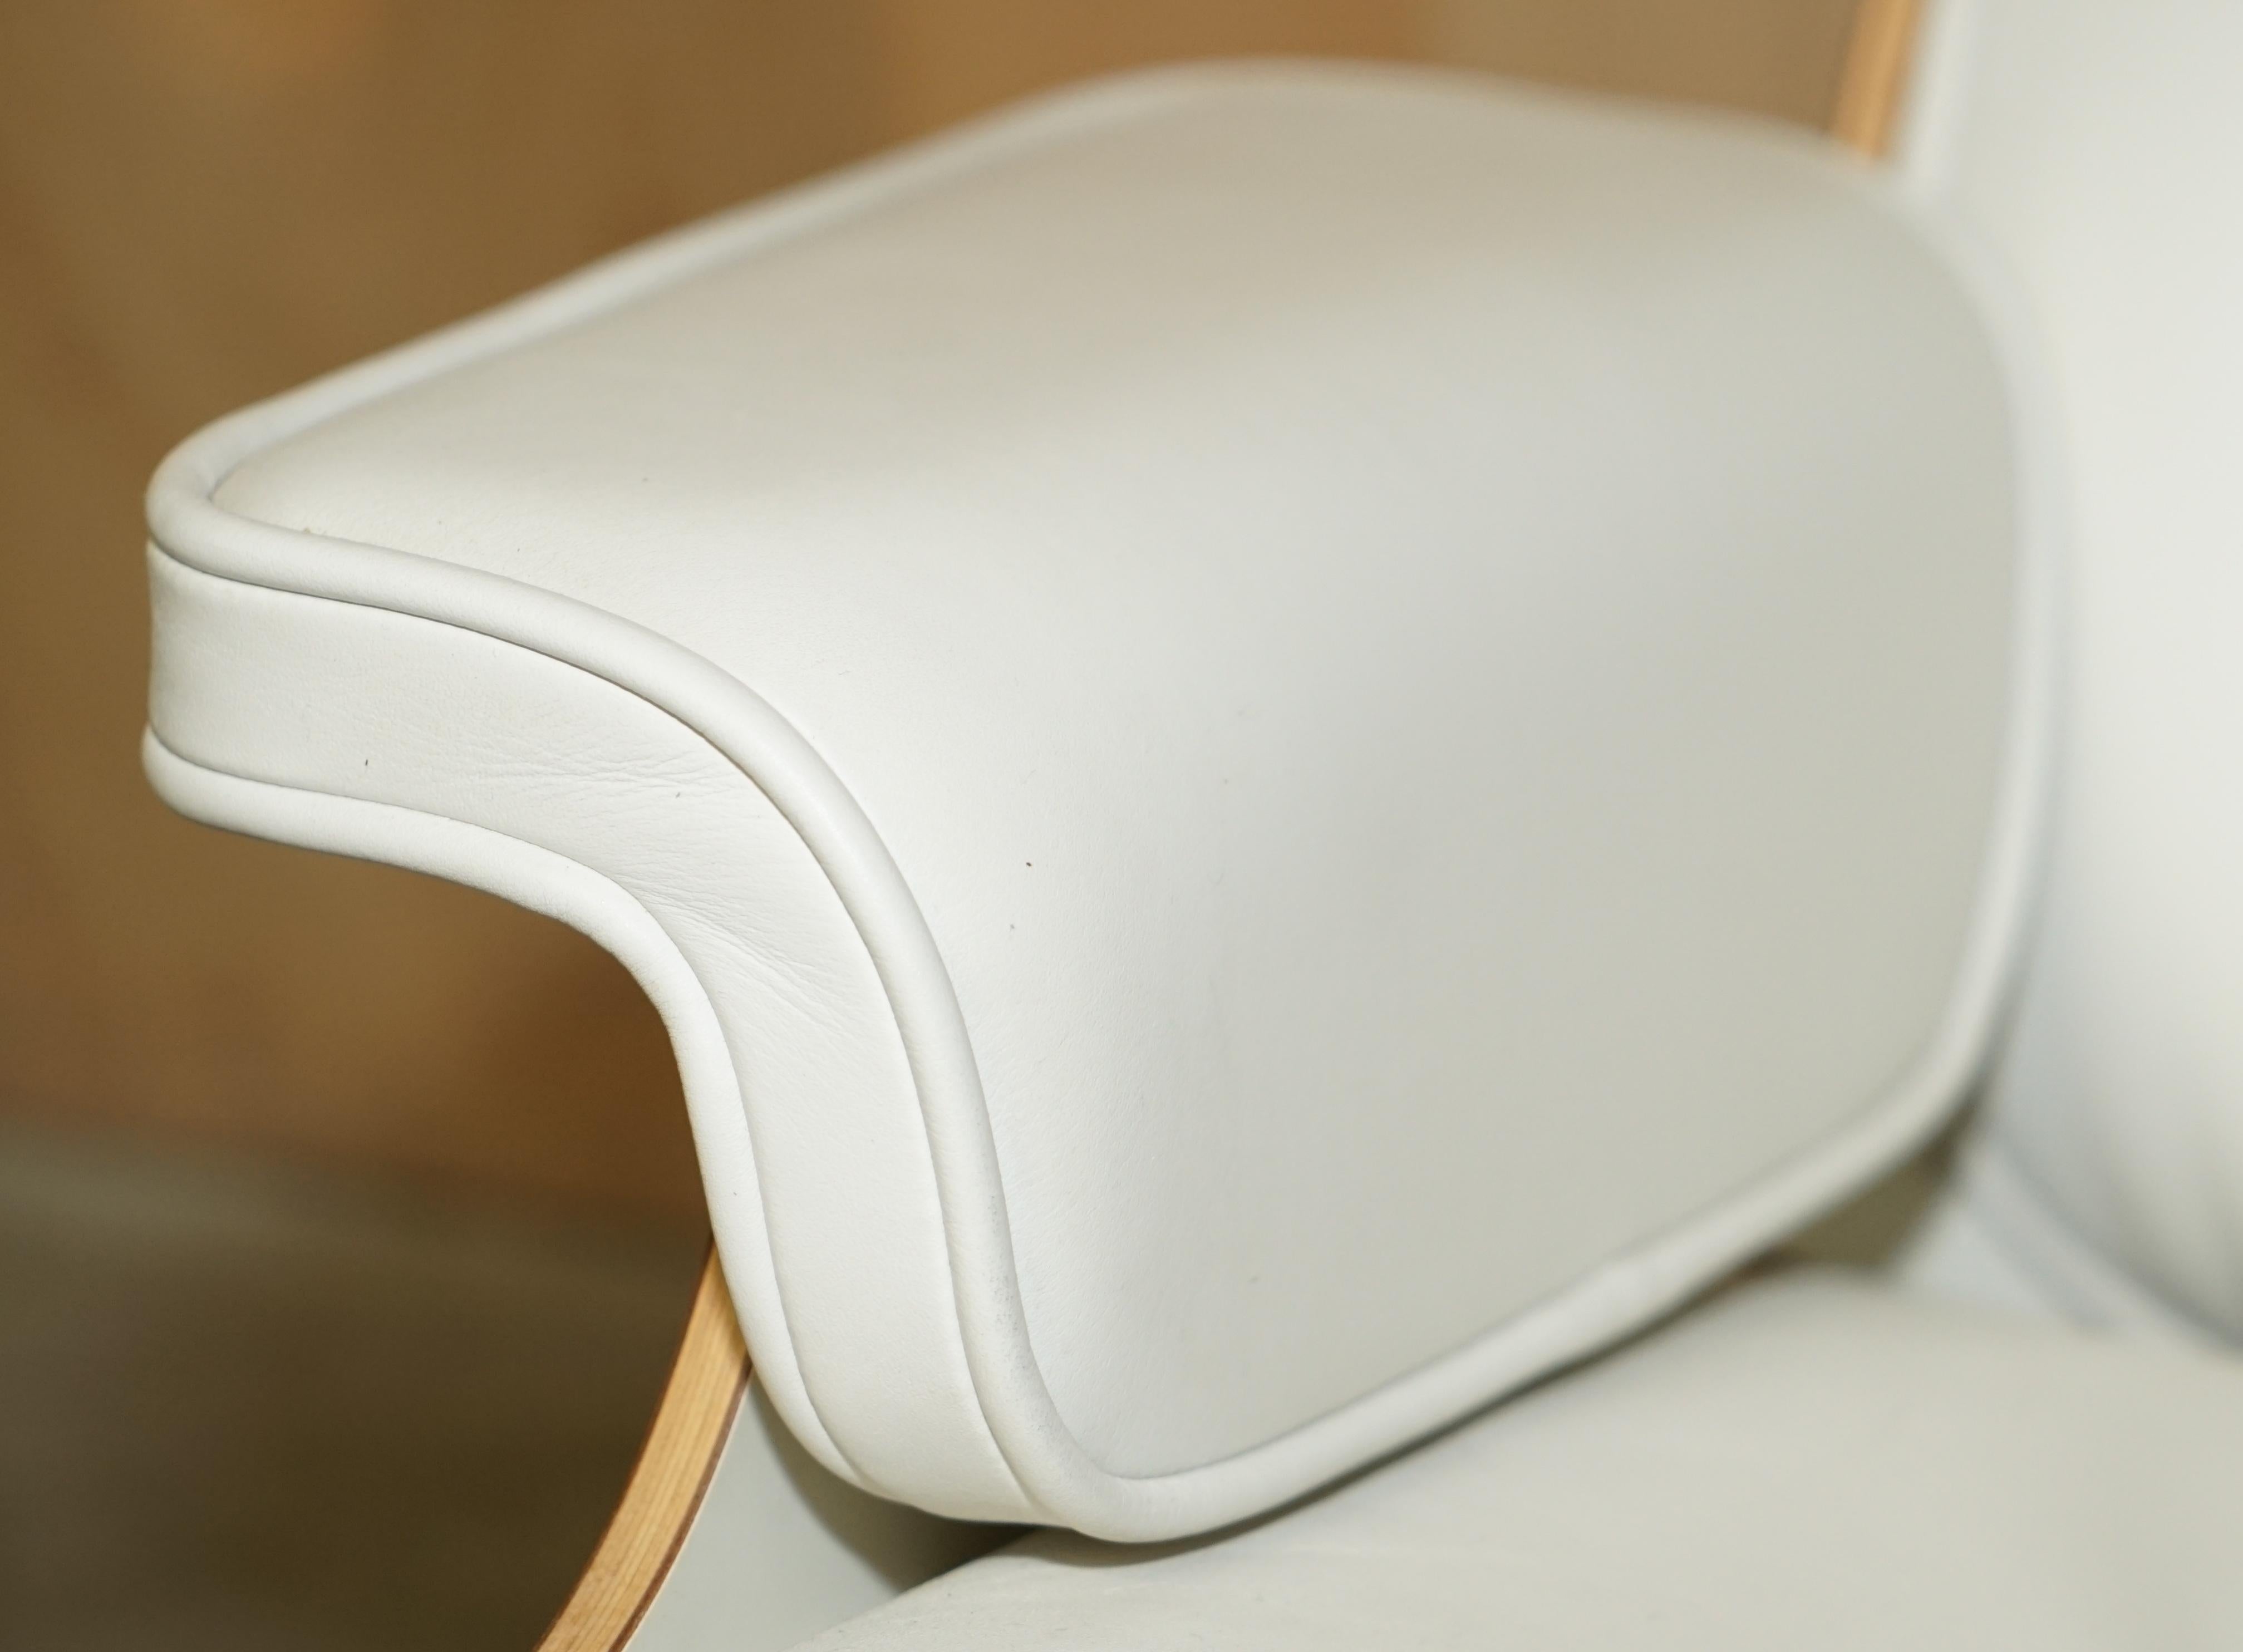 Whiting fauteuil de salon Charles and Ray Eames american cherry wood white leather en vente 1